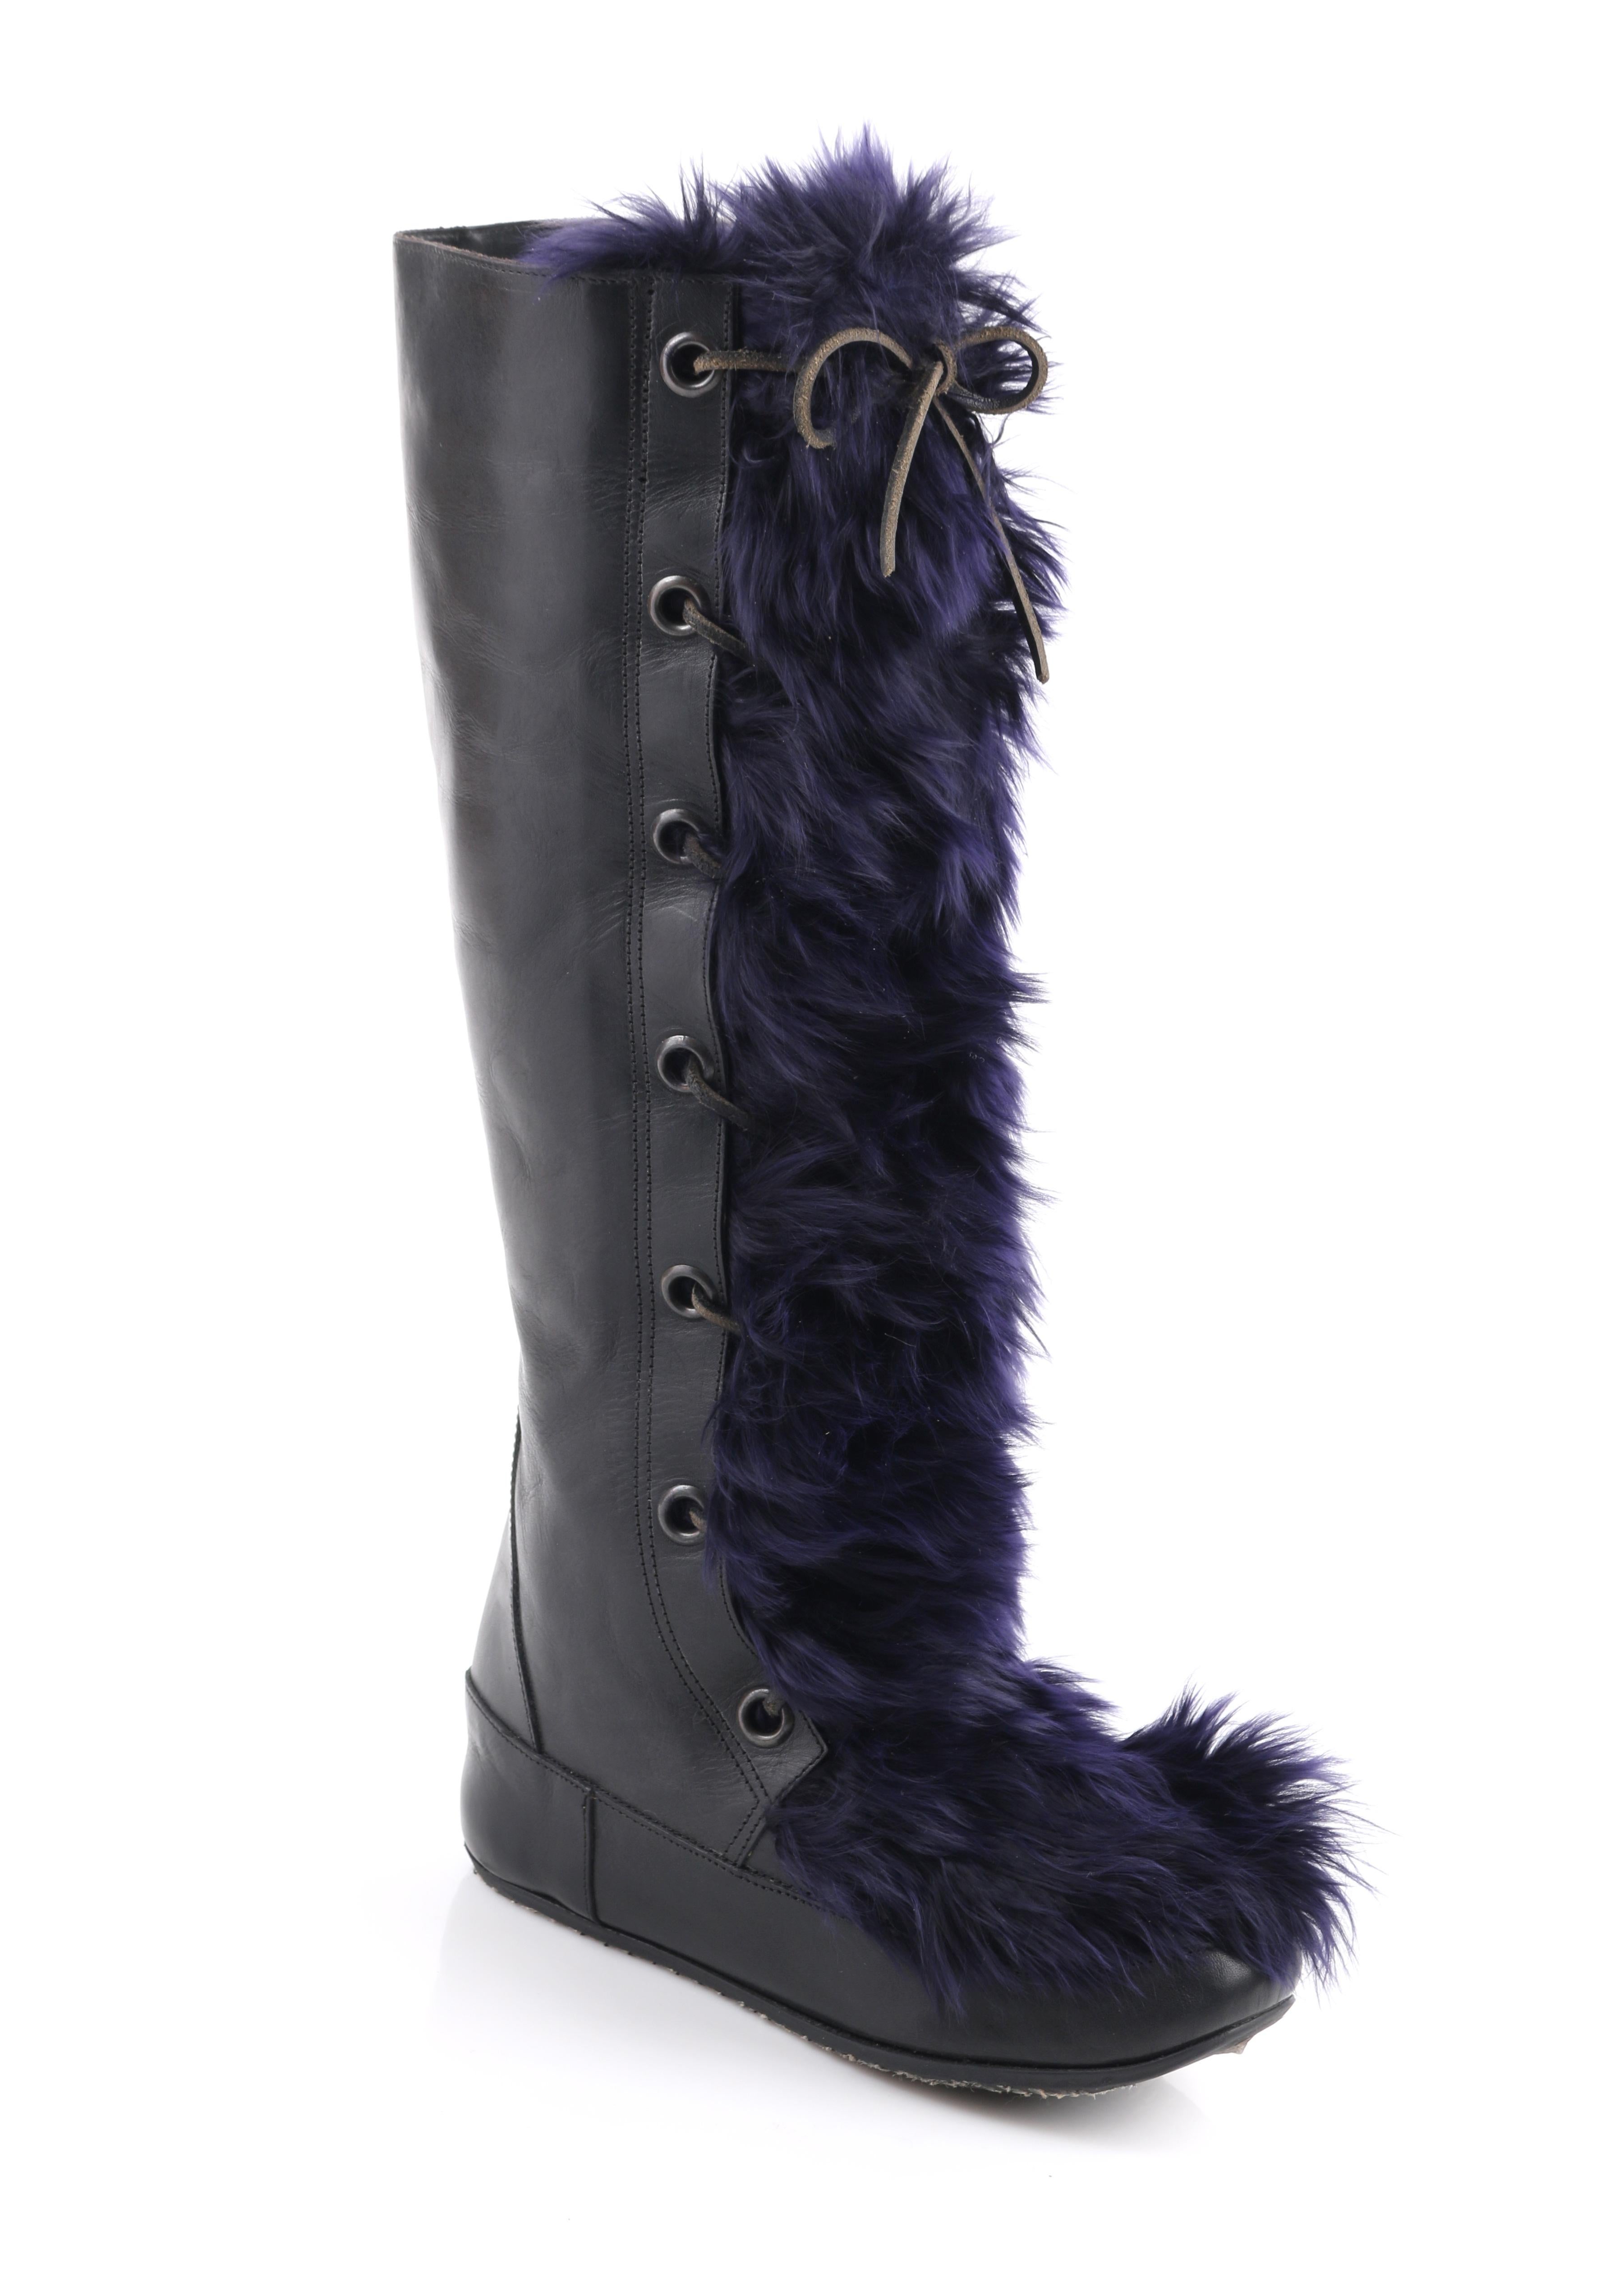 DESCRIPTION: Marni Black Leather & Navy Blue Angora Fur Lace Up Knee-High Apres Boots
 
Estimated Retail: $1330
 
Brand / Manufacturer: Marni
Style: Knee-high boots
Color(s): Shades of black and navy blue
Marked Materials: Upper: Leather; Lining: